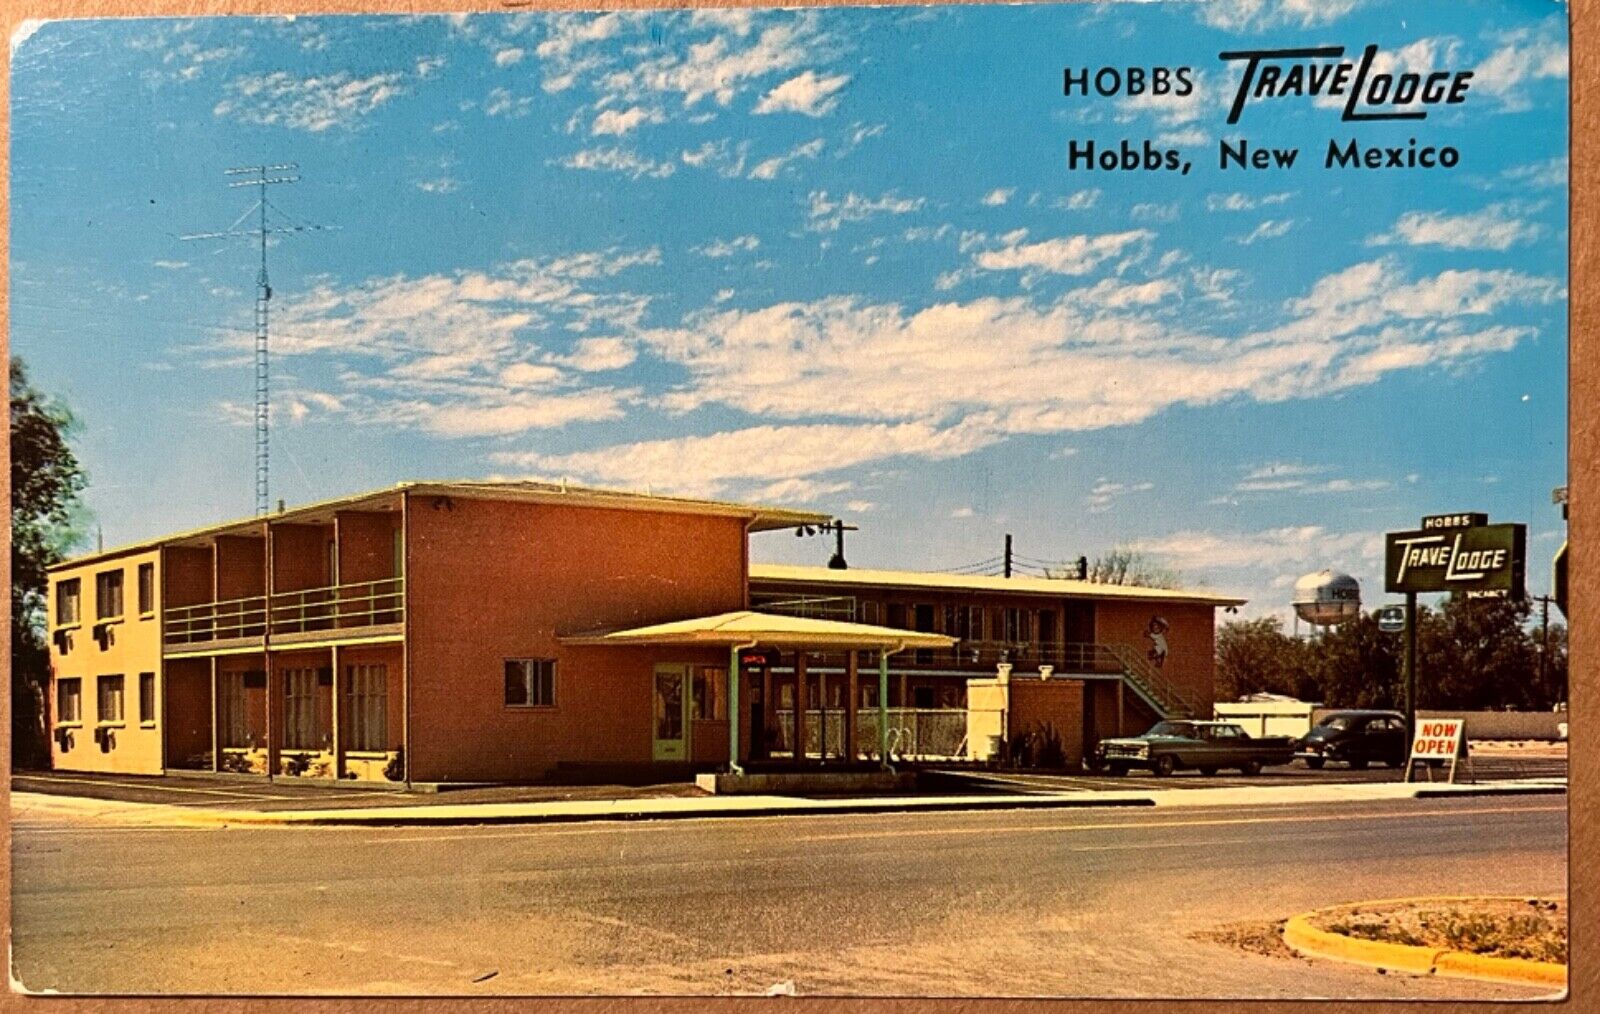 Hobbs New Mexico Travel Lodge Motel Water Tower Old Cars Vintage Postcard c1960